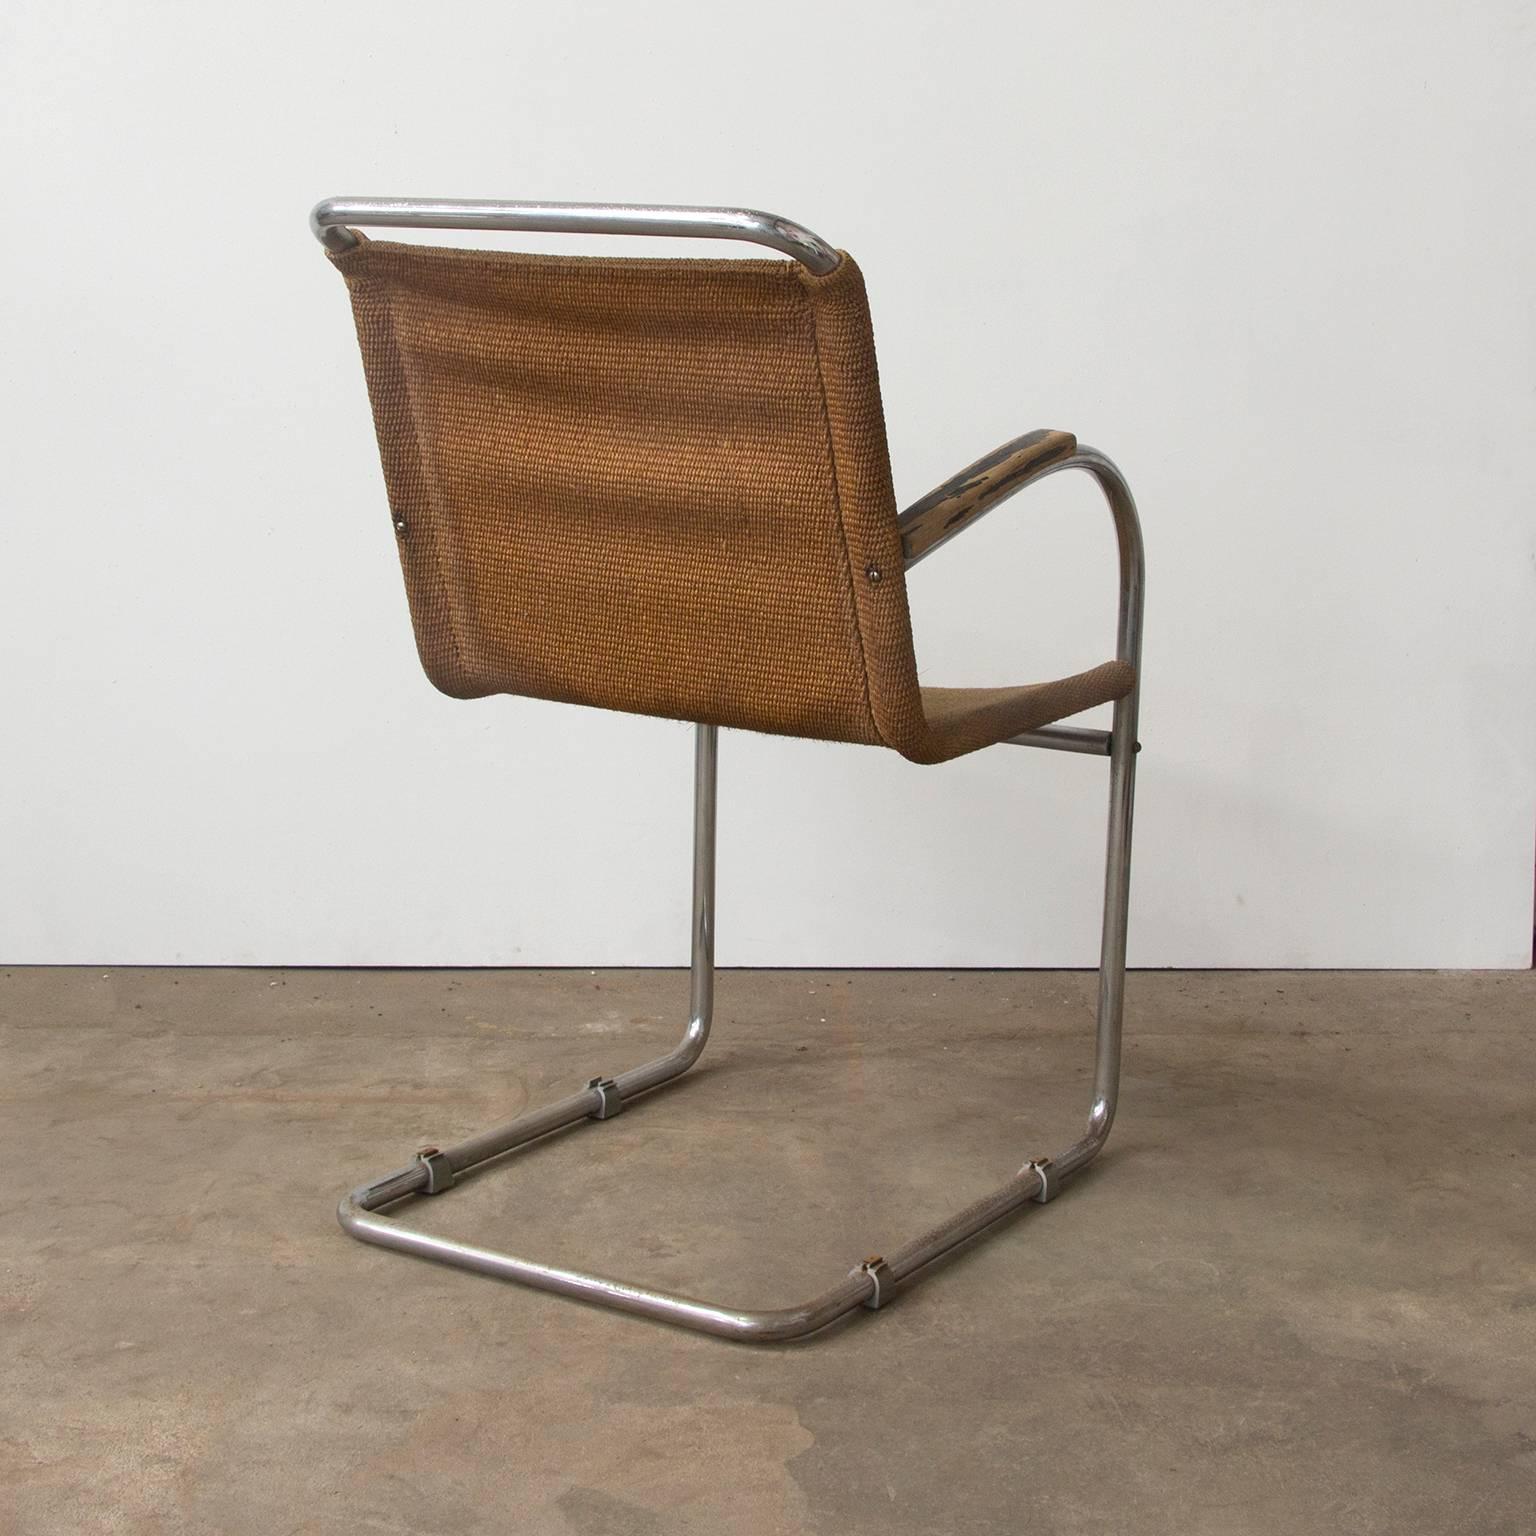 Bauhaus Circa 1930, Early Vintage Tubular Side Chair with Original Rope Woven Seat